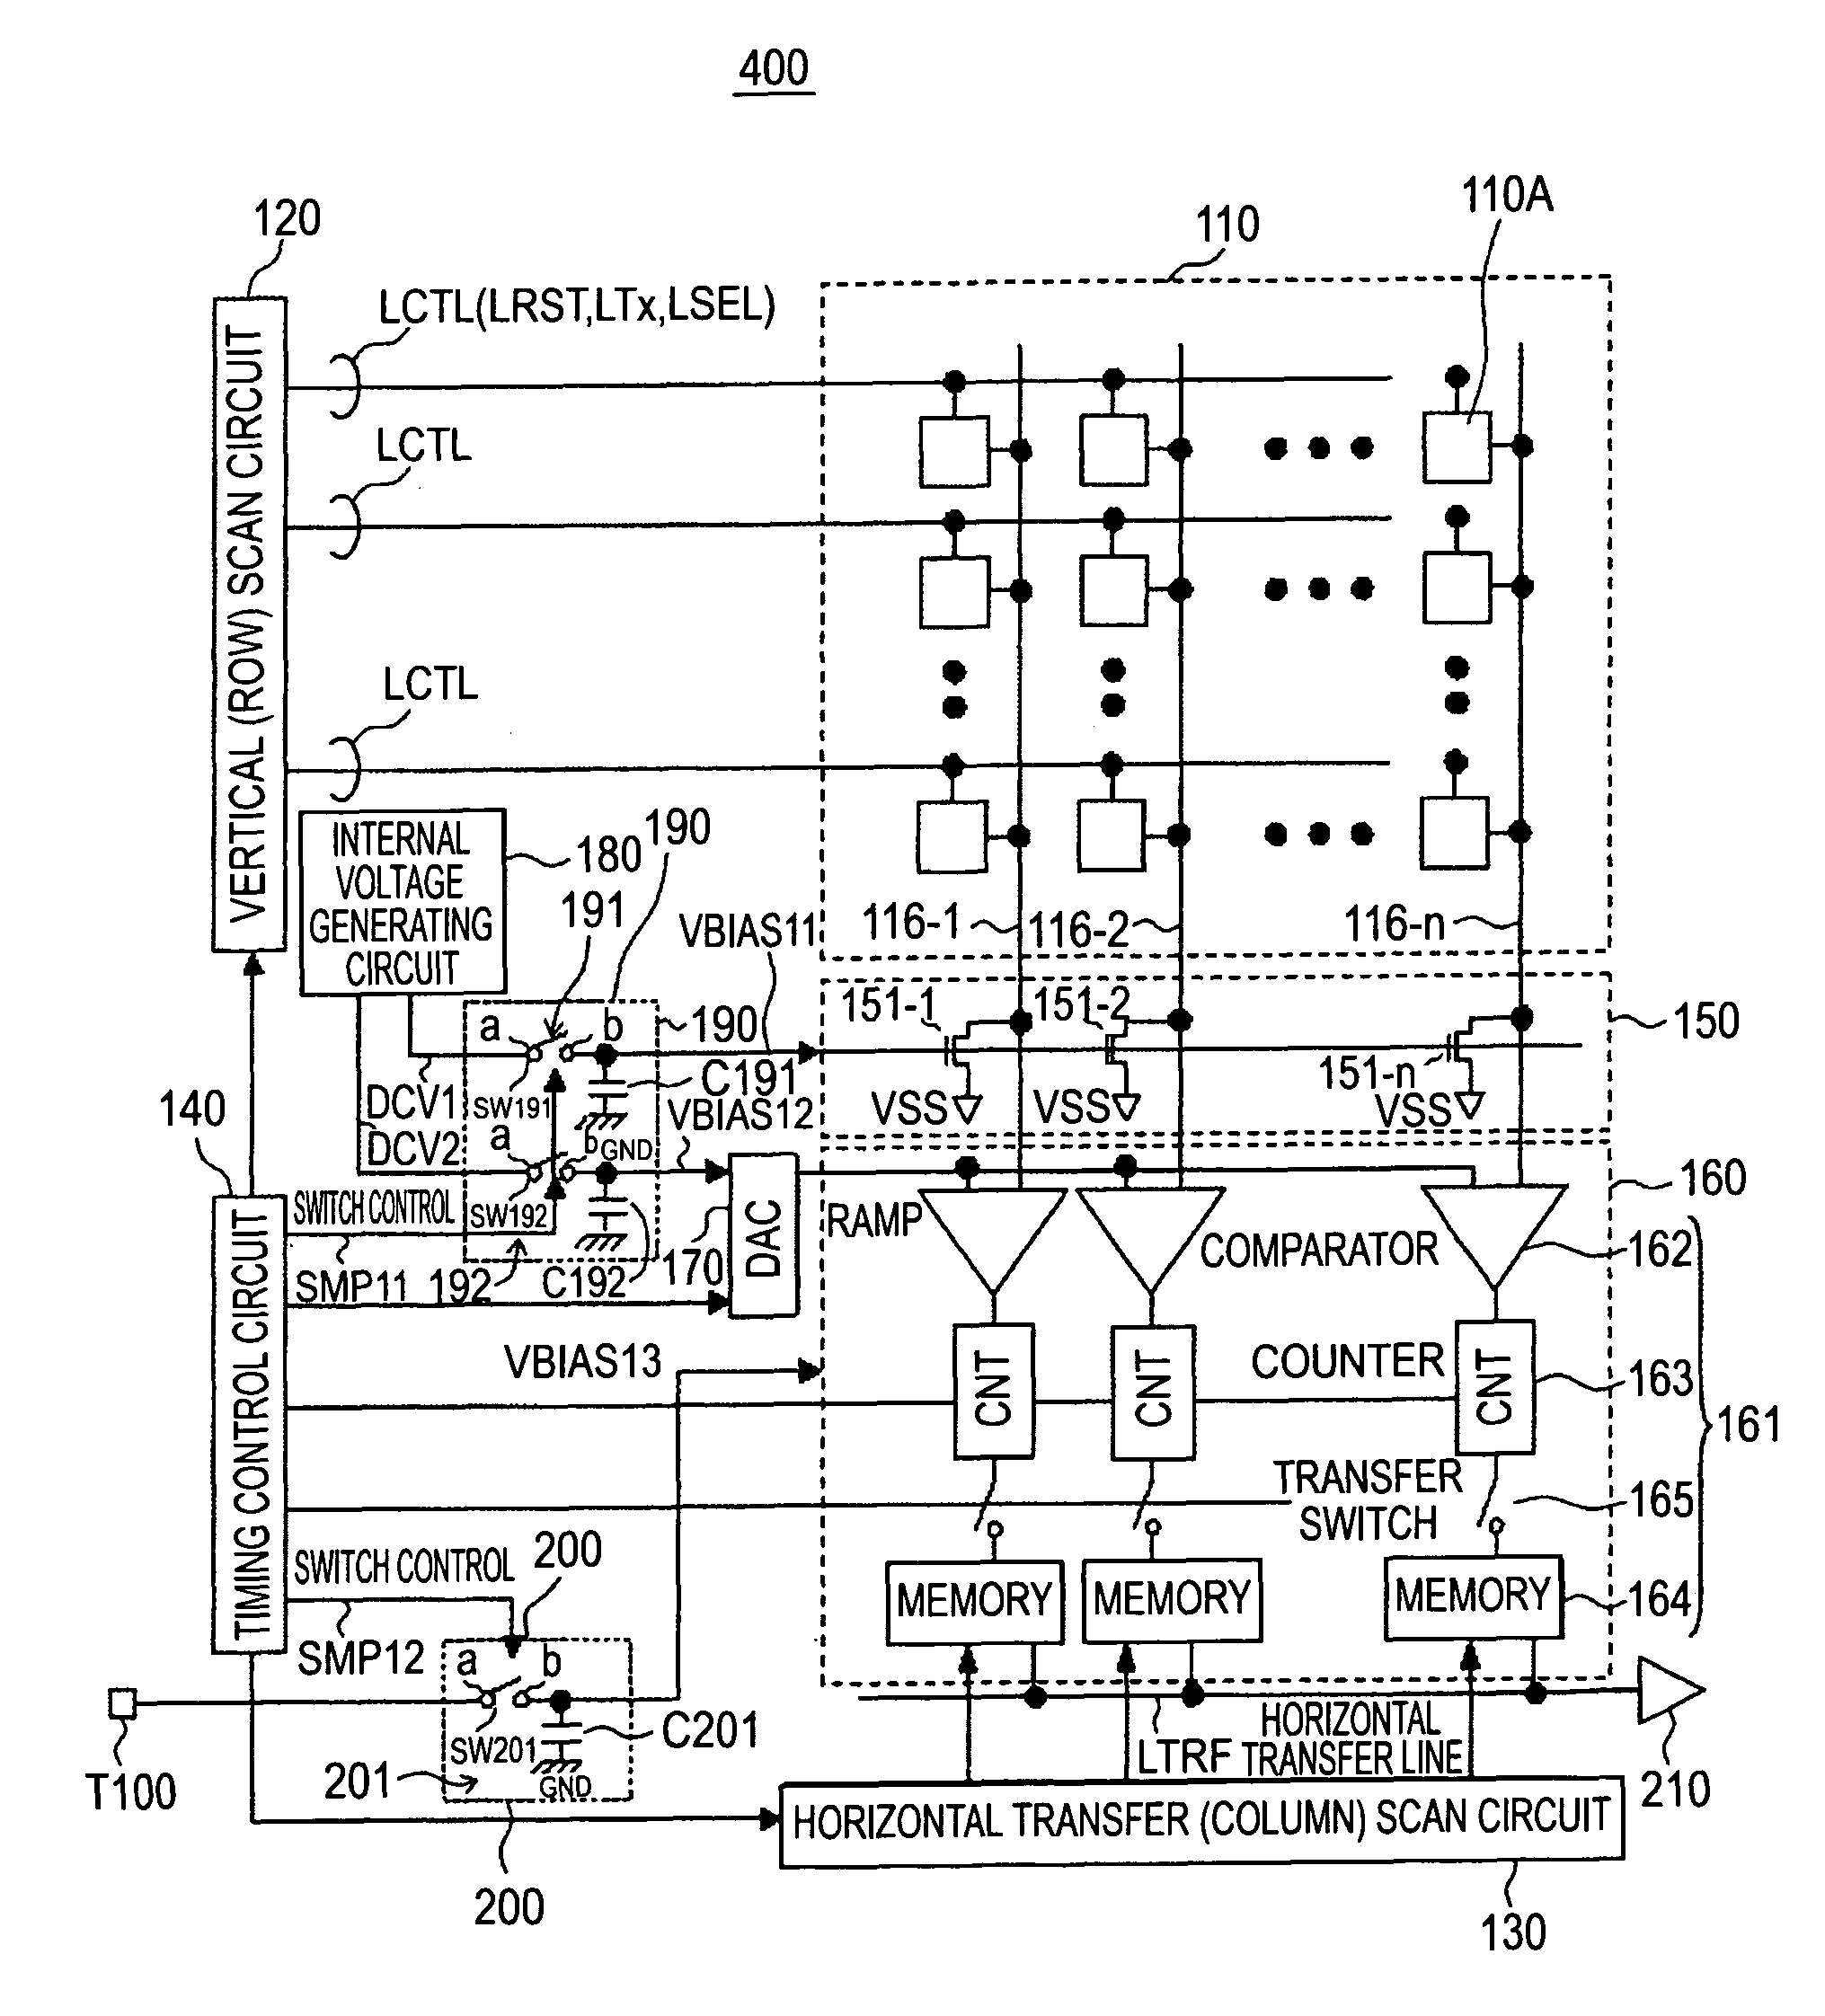 Solid-state imaging device, method of driving the device, and camera system with varied timing of sampling period for sampling a bias voltage during pixel readout